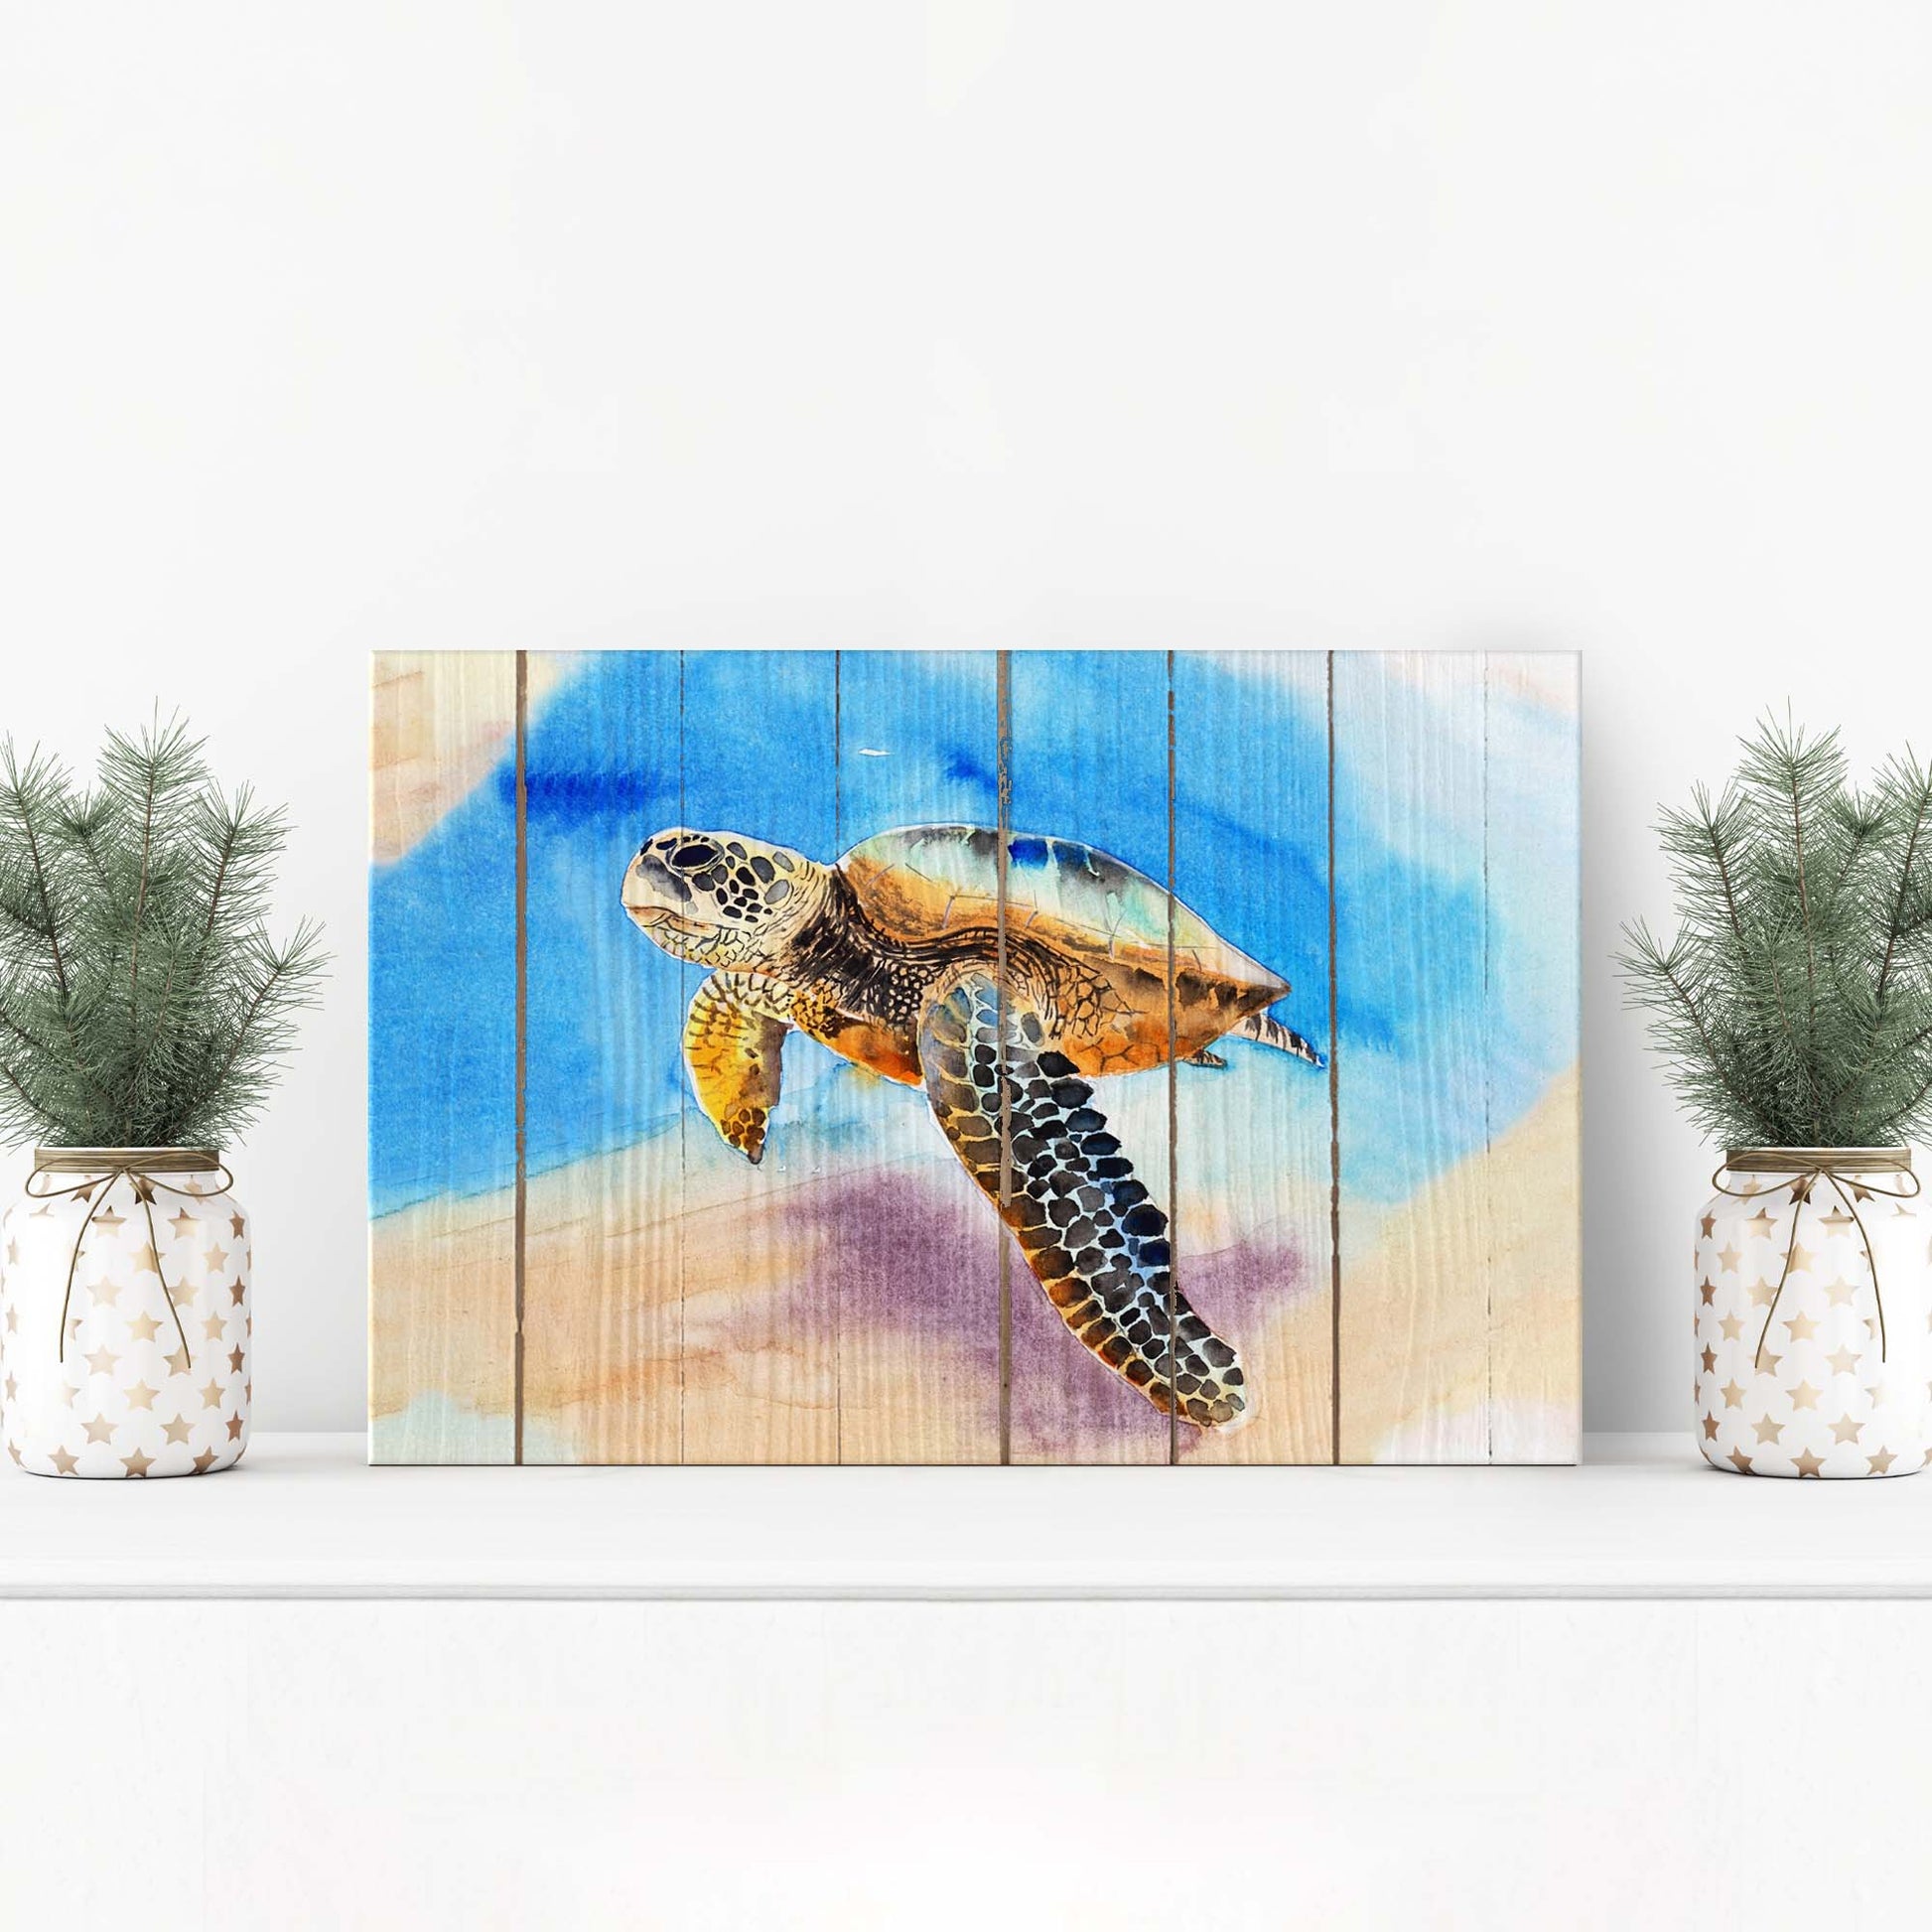 Sea Turtle Watercolor Painting Canvas Wall Art - Image by Tailored Canvases